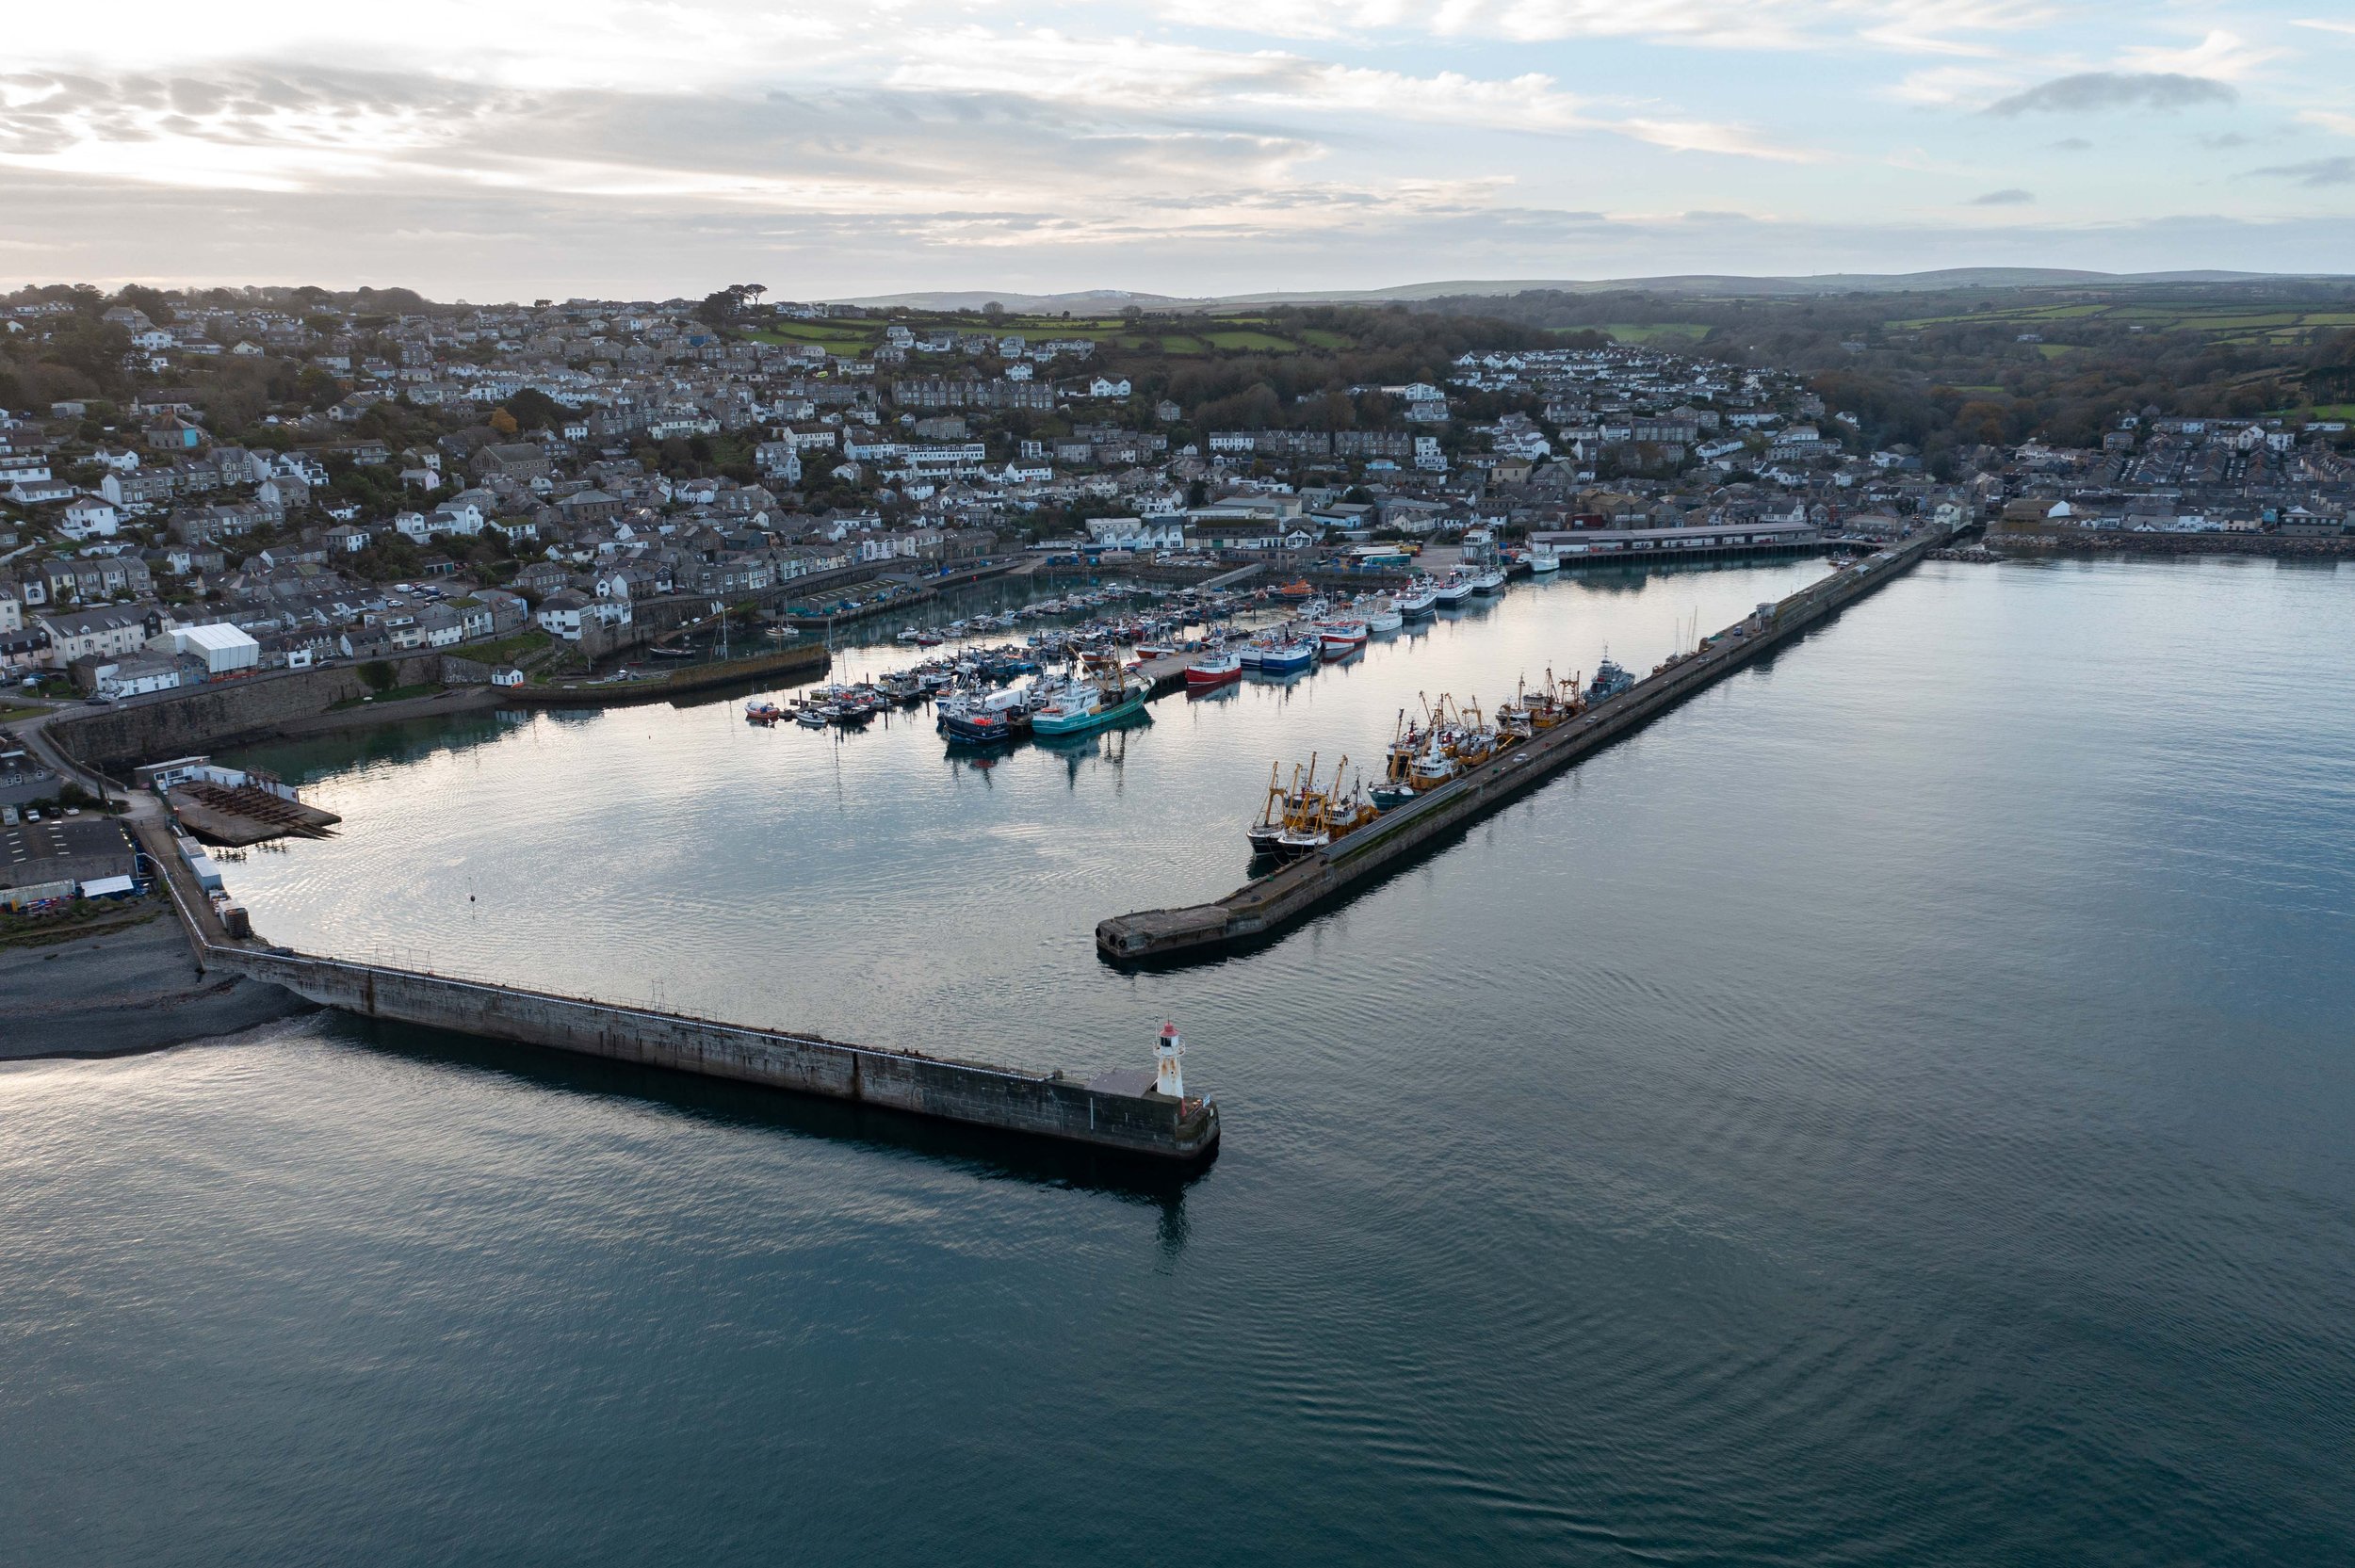  Believe it or not, this is one of the UK’s largest fishing ports 